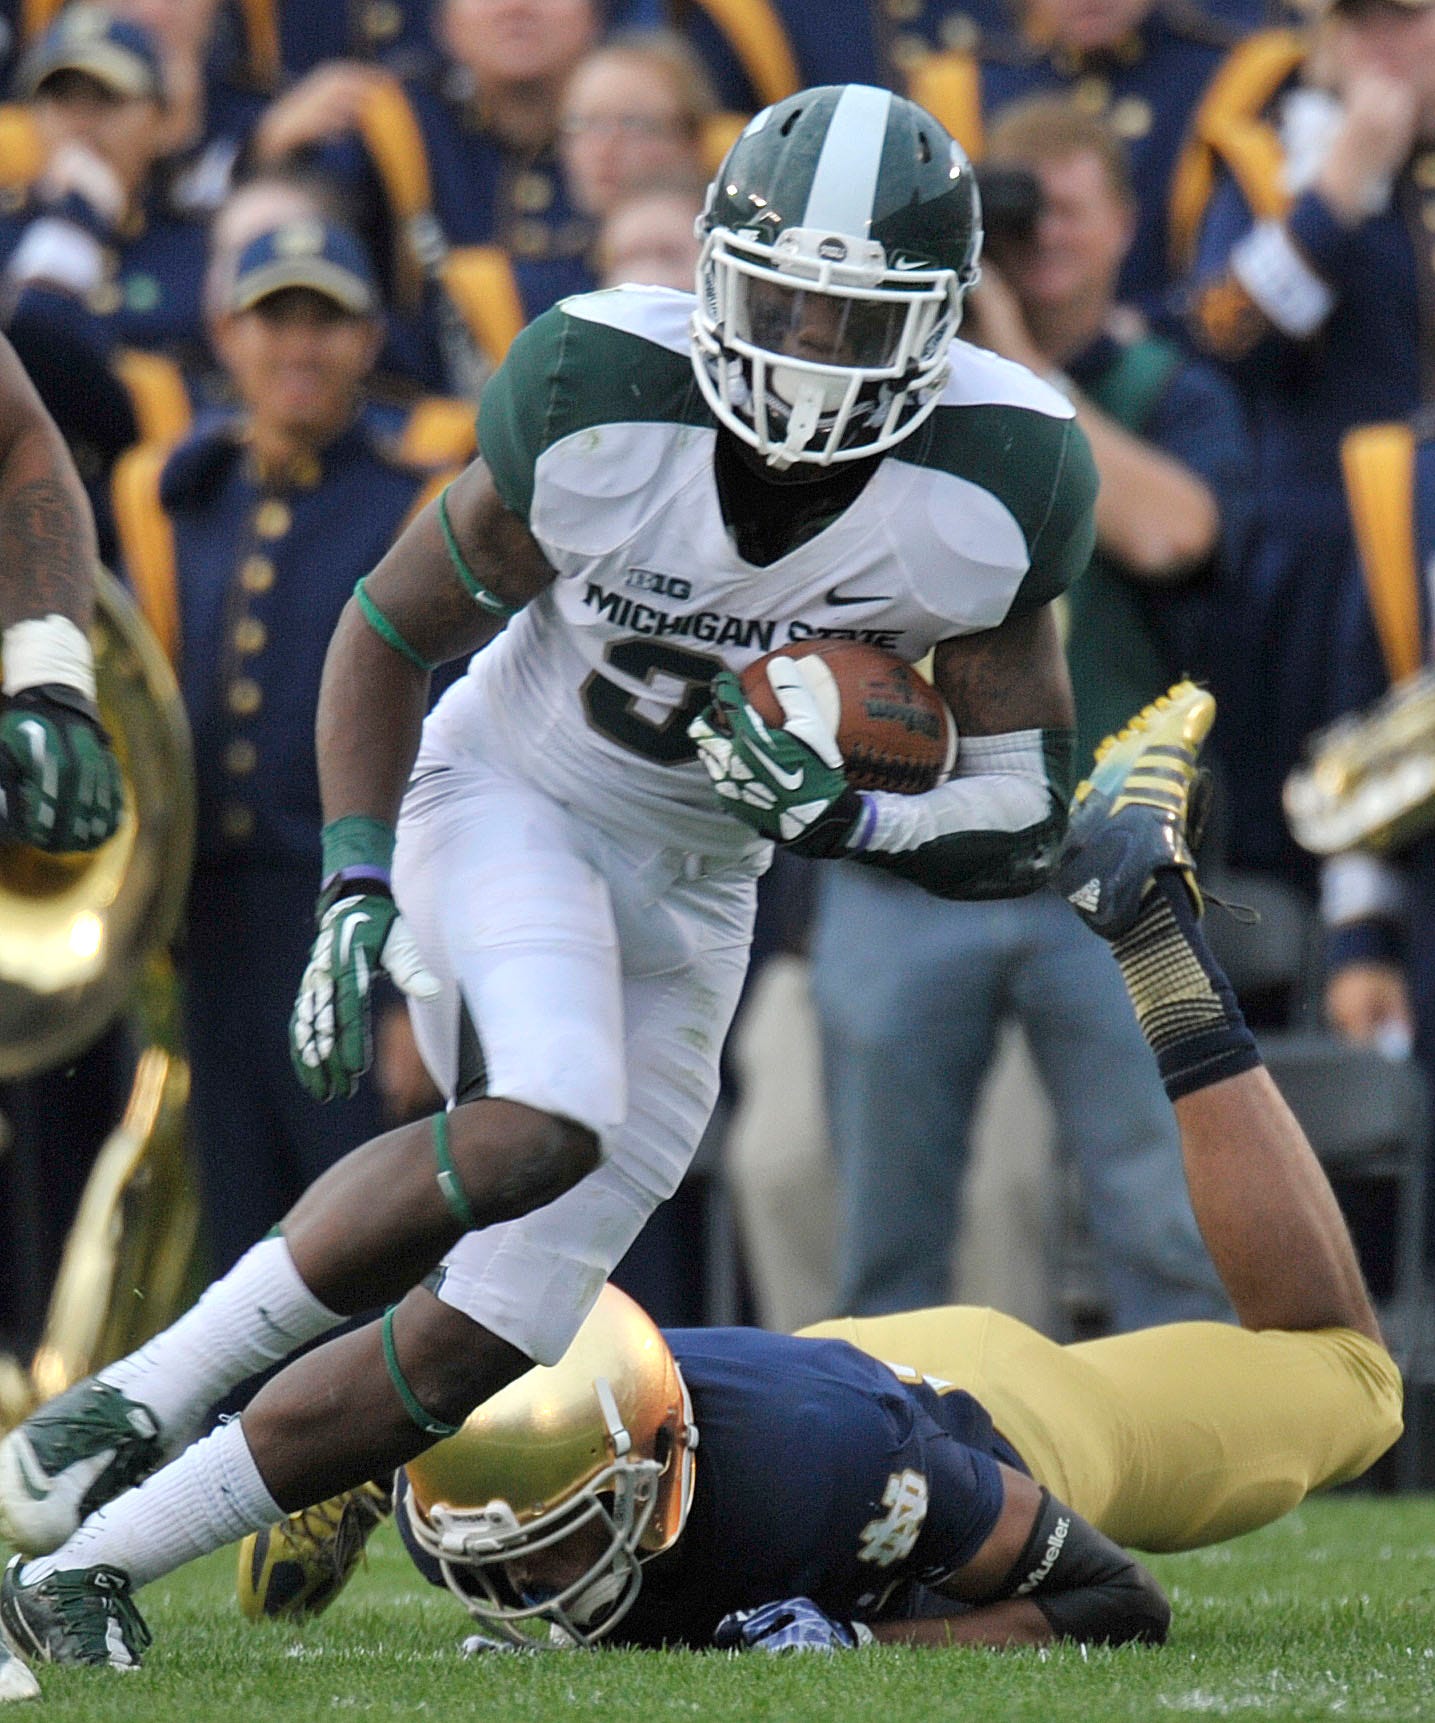 CORNERBACK – Darqueze Dennard, 2010-13: The Jim Thorpe Award winner as a senior in 2013, Dennard was also a consensus first-team All-American and the leader of Michigan State’s “No-fly Zone,” the nickname the defense gave itself as the Spartans rolled to the Big Ten title and a won in the Rose Bowl. The Big Ten’s Defensive Back of the Year in 2013 as well as a Nagurski Trophy finalist, Dennard finished his career with 10 interceptions and 20 pass break-ups in 44 career games.